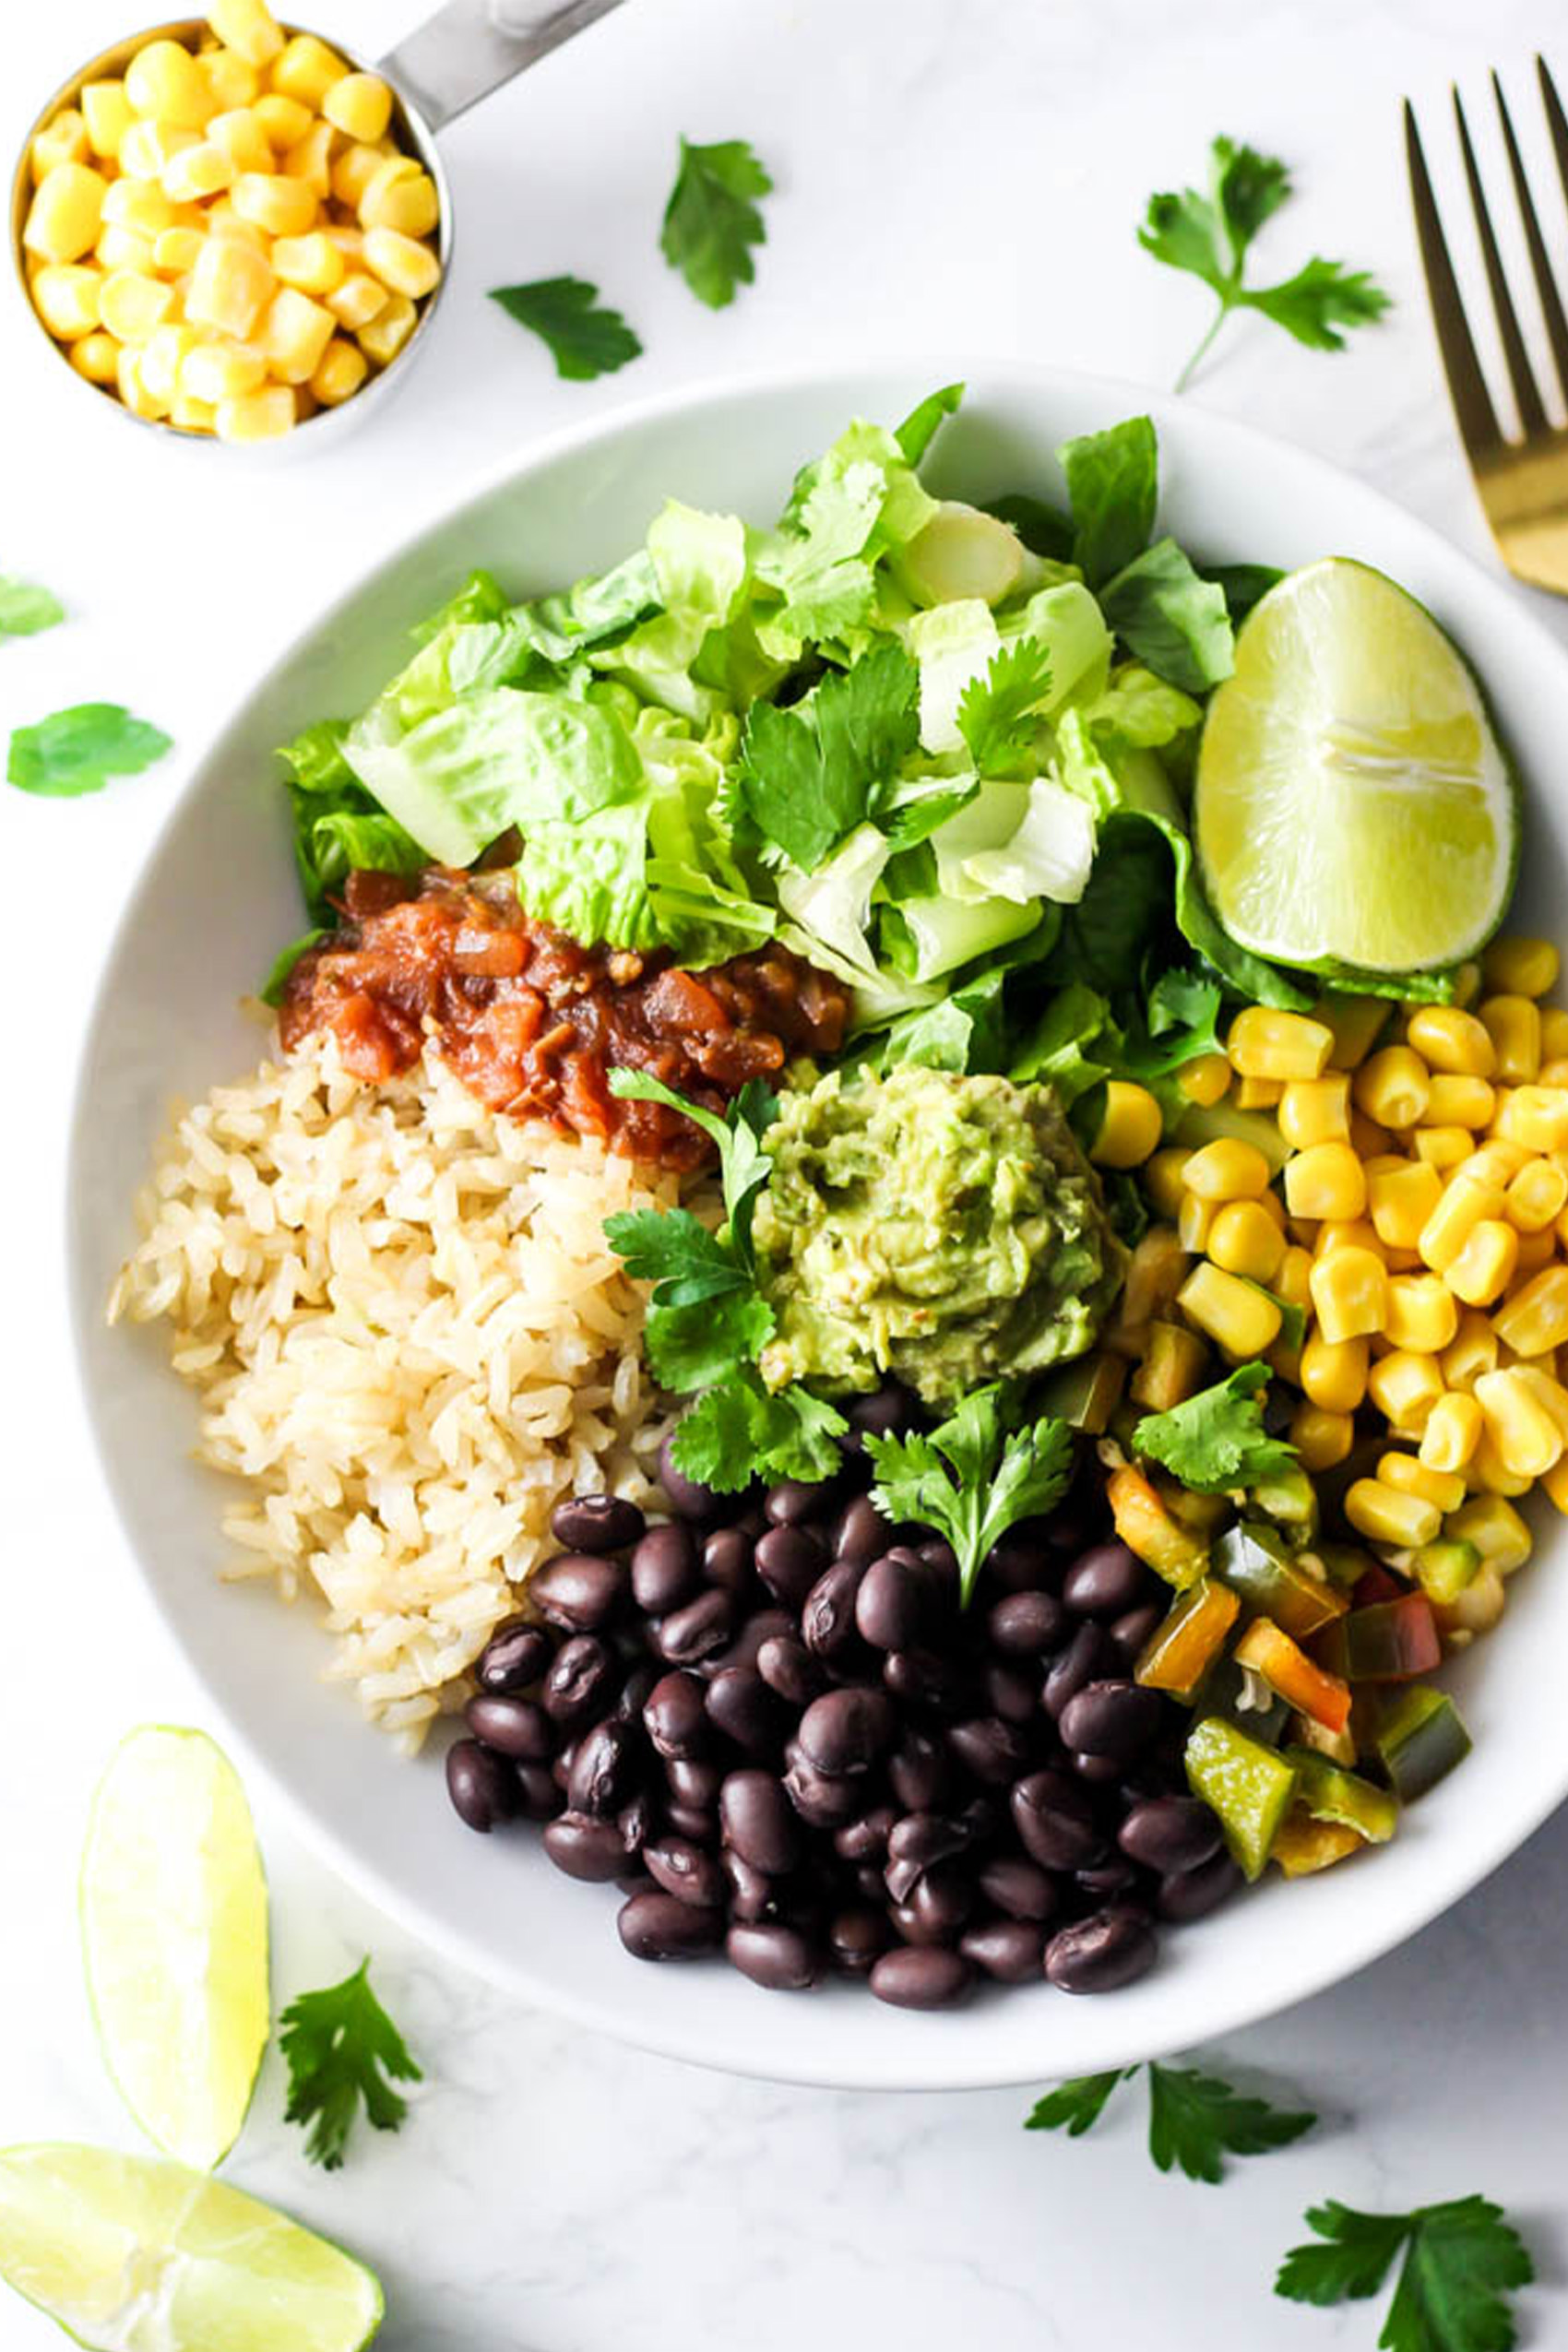 a vegan burrito bowl with rice, black beans, corn, peppers, guacamole and greens